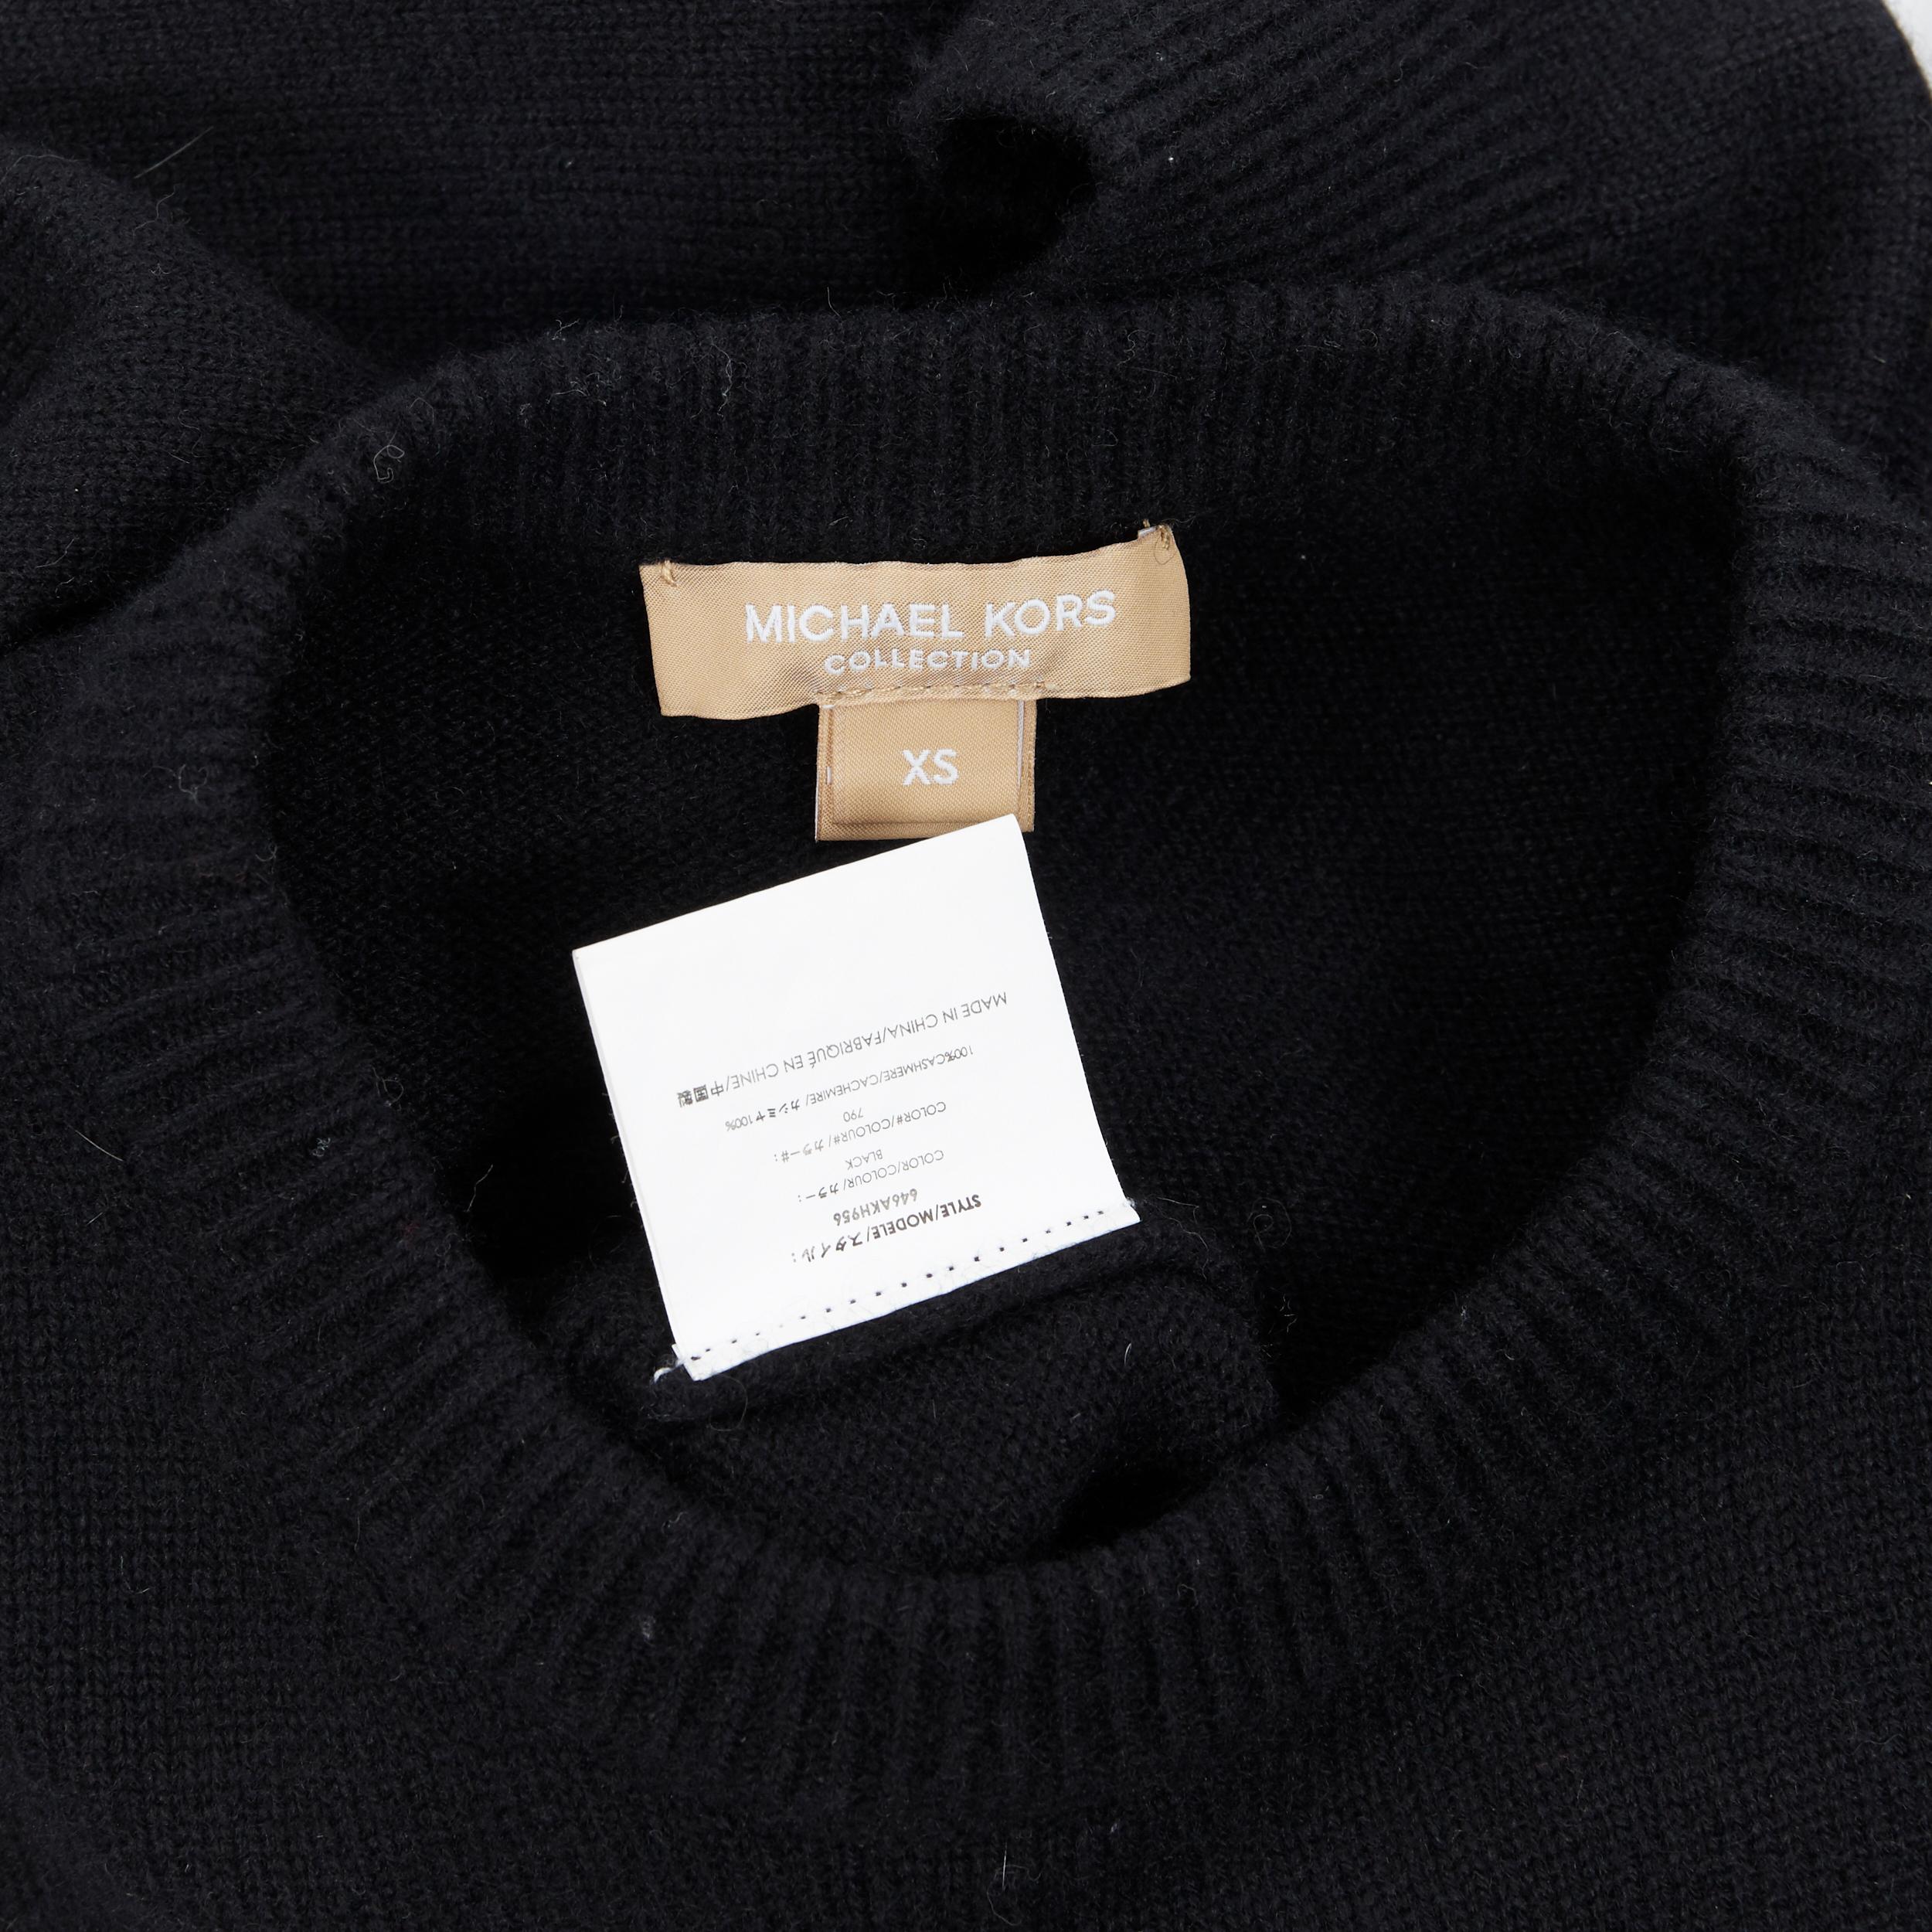 MICHAEL KORS COLLECTION 100% cashmere black long sleeve pullover sweater XS 1